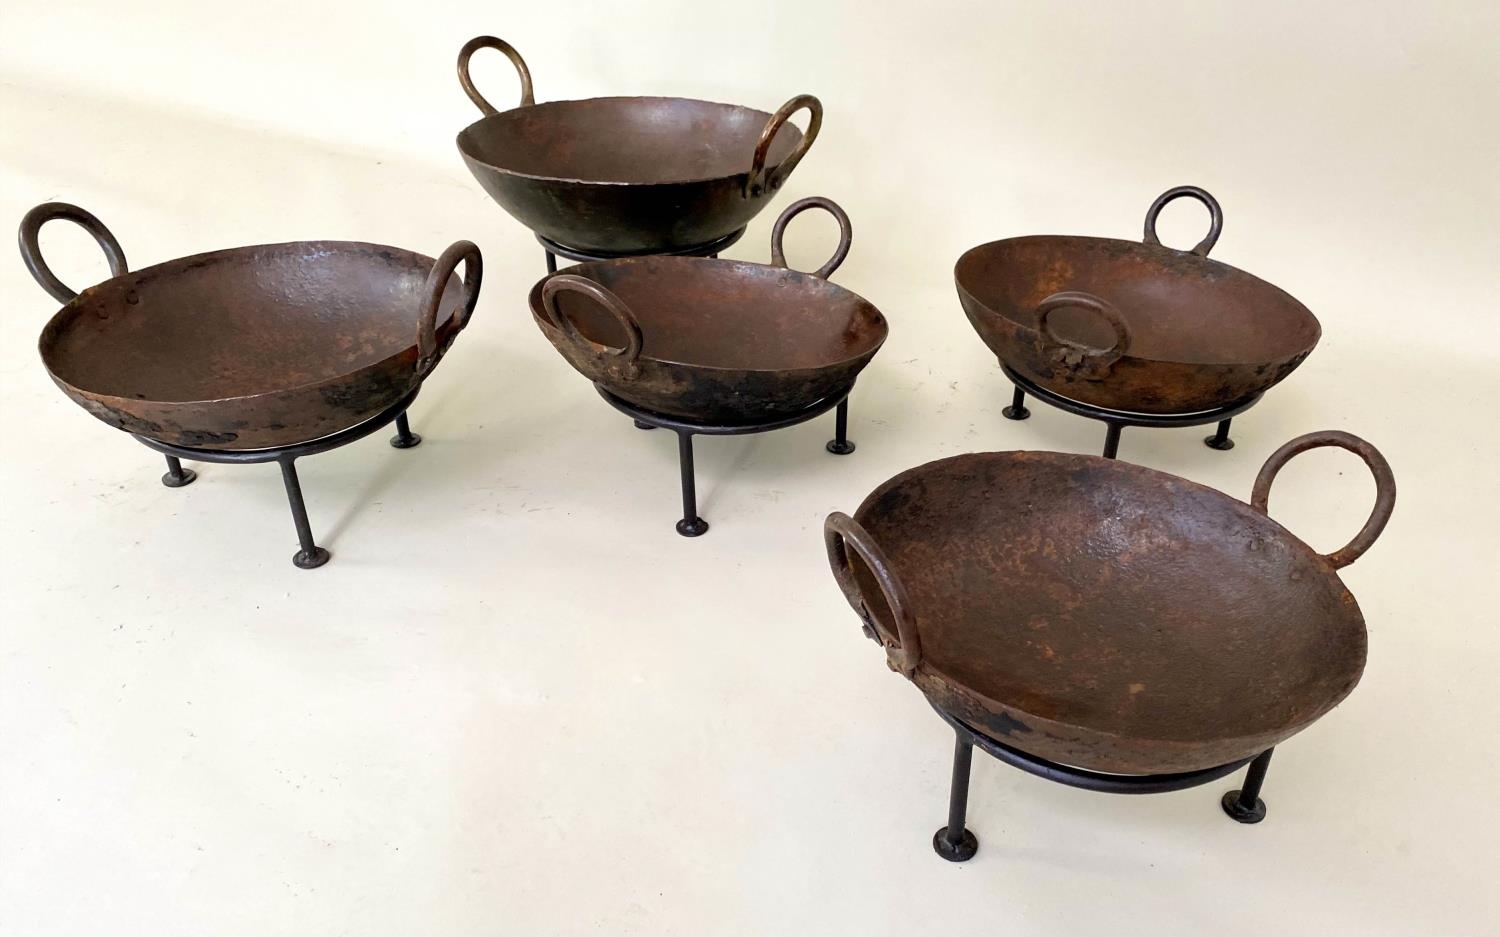 INDIAN KADAI FIRE BOWLS ON STANDS, a set of five, 46cm diam. at largest, of various sizes. (5)